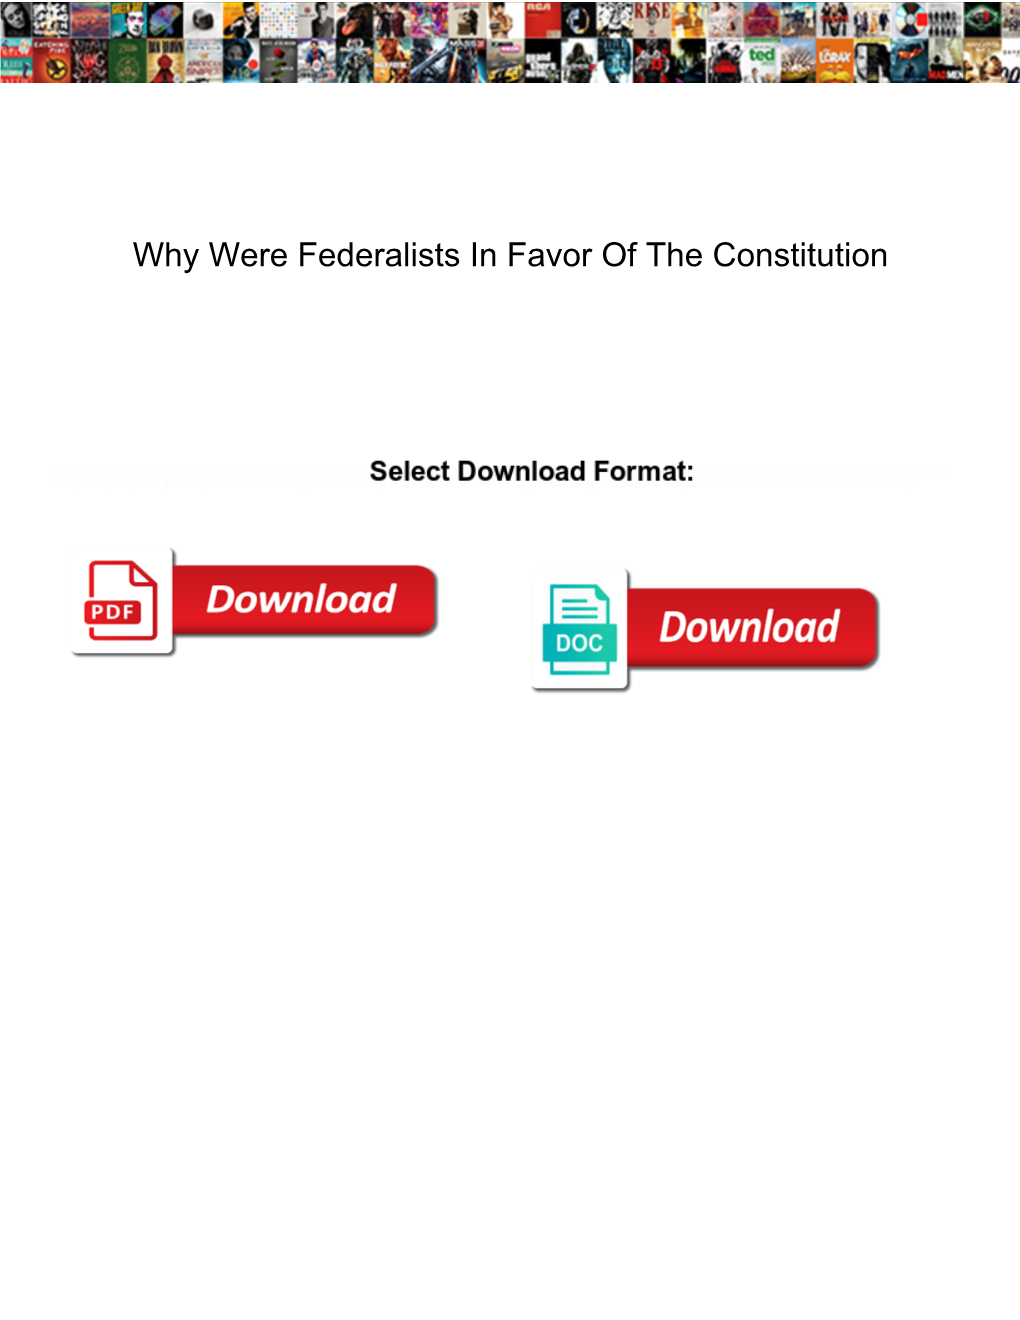 Why Were Federalists in Favor of the Constitution